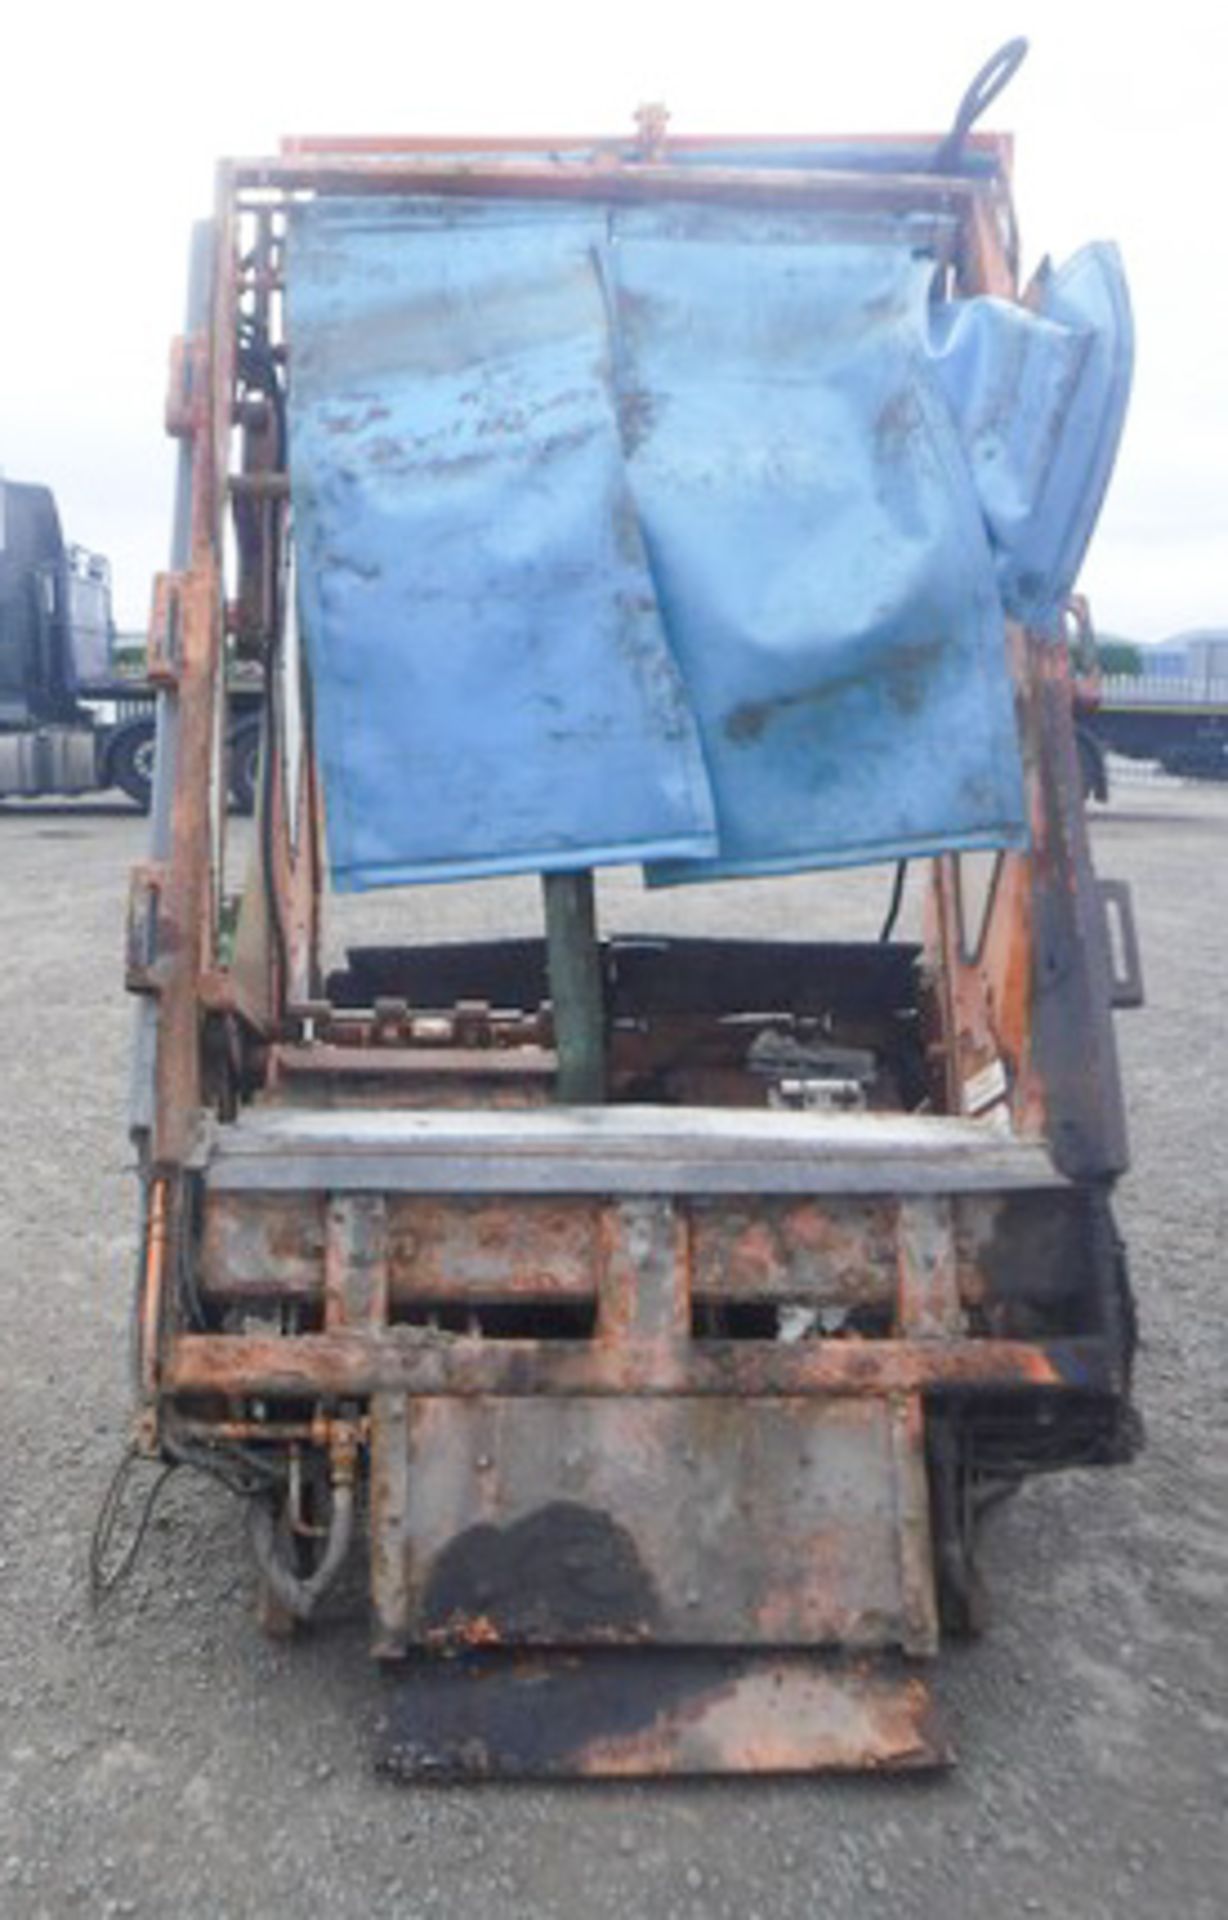 2005 LIFTING-GEAR for the rear of bin lorries (2). Type - TCA-DEL2. Fab No - 050610380, RL0822603